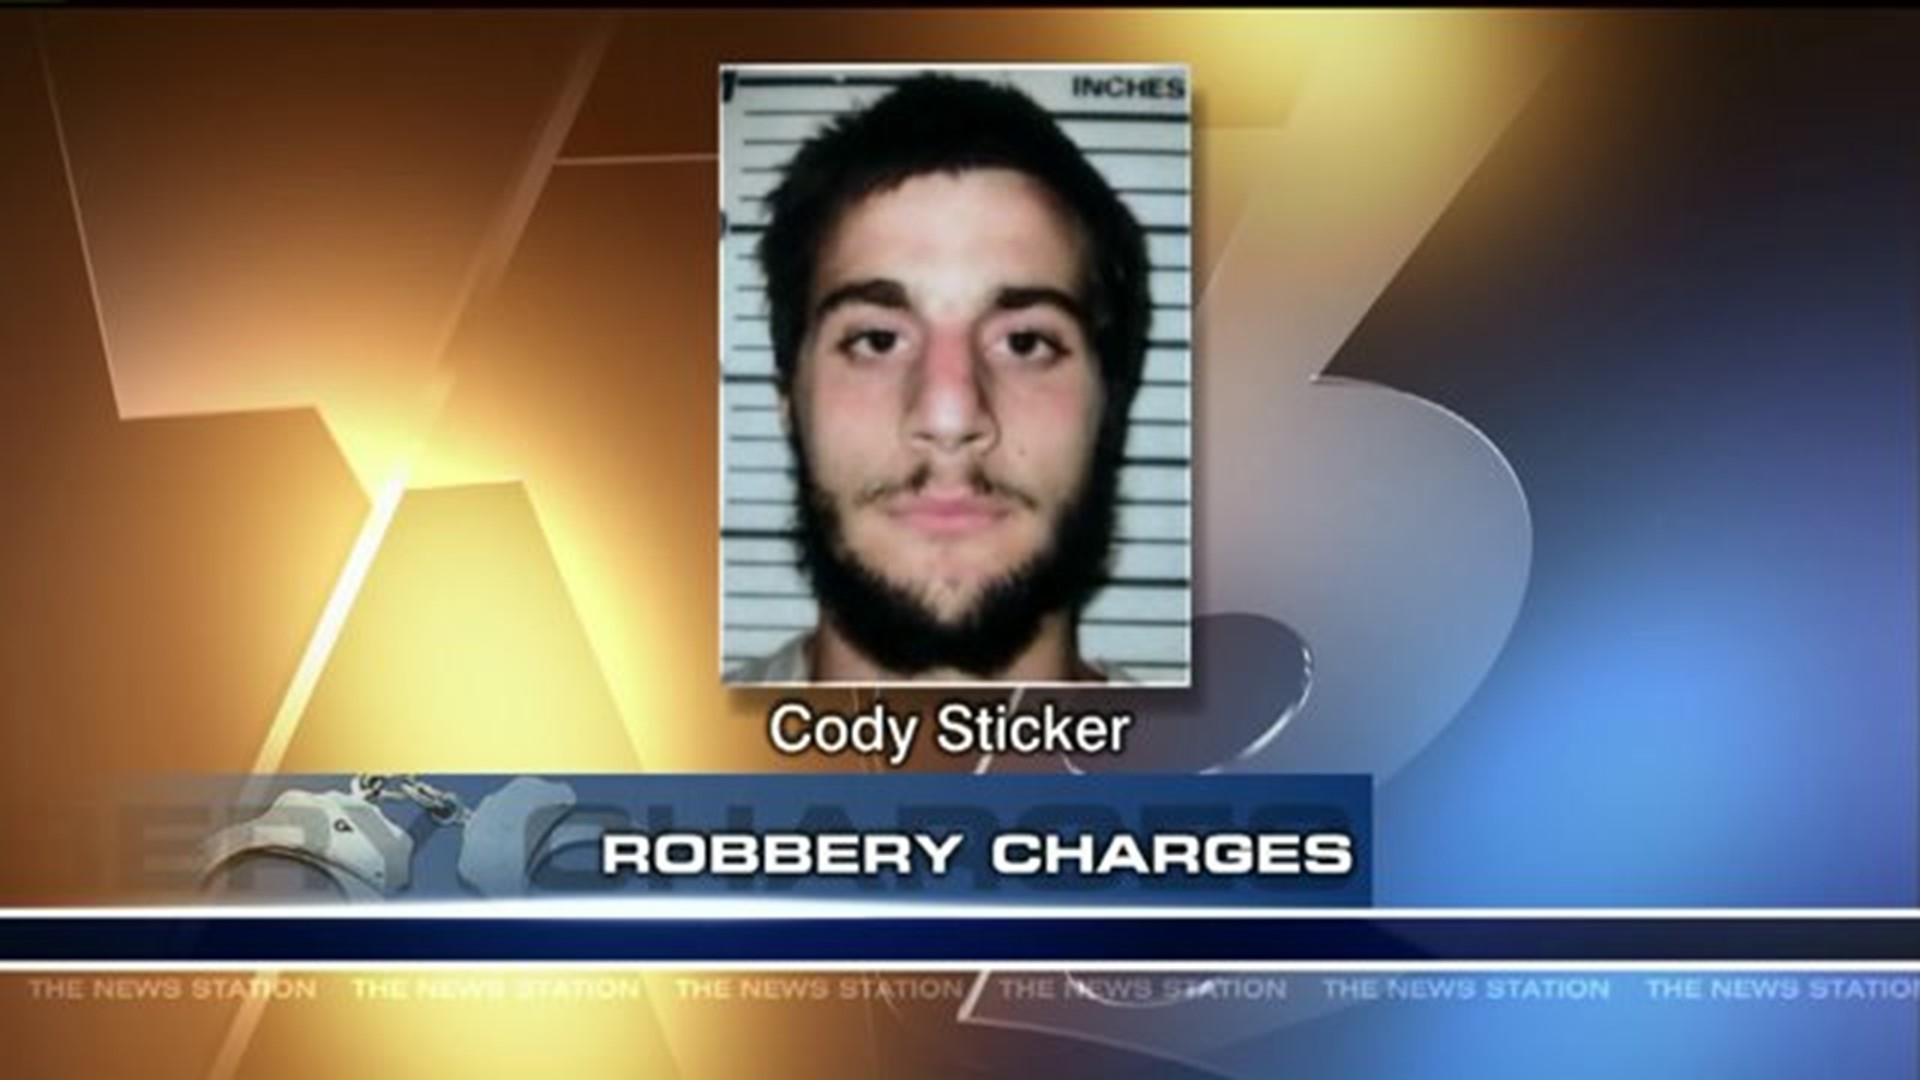 Man Charged with Robbing Truck Stop in Schuylkill County